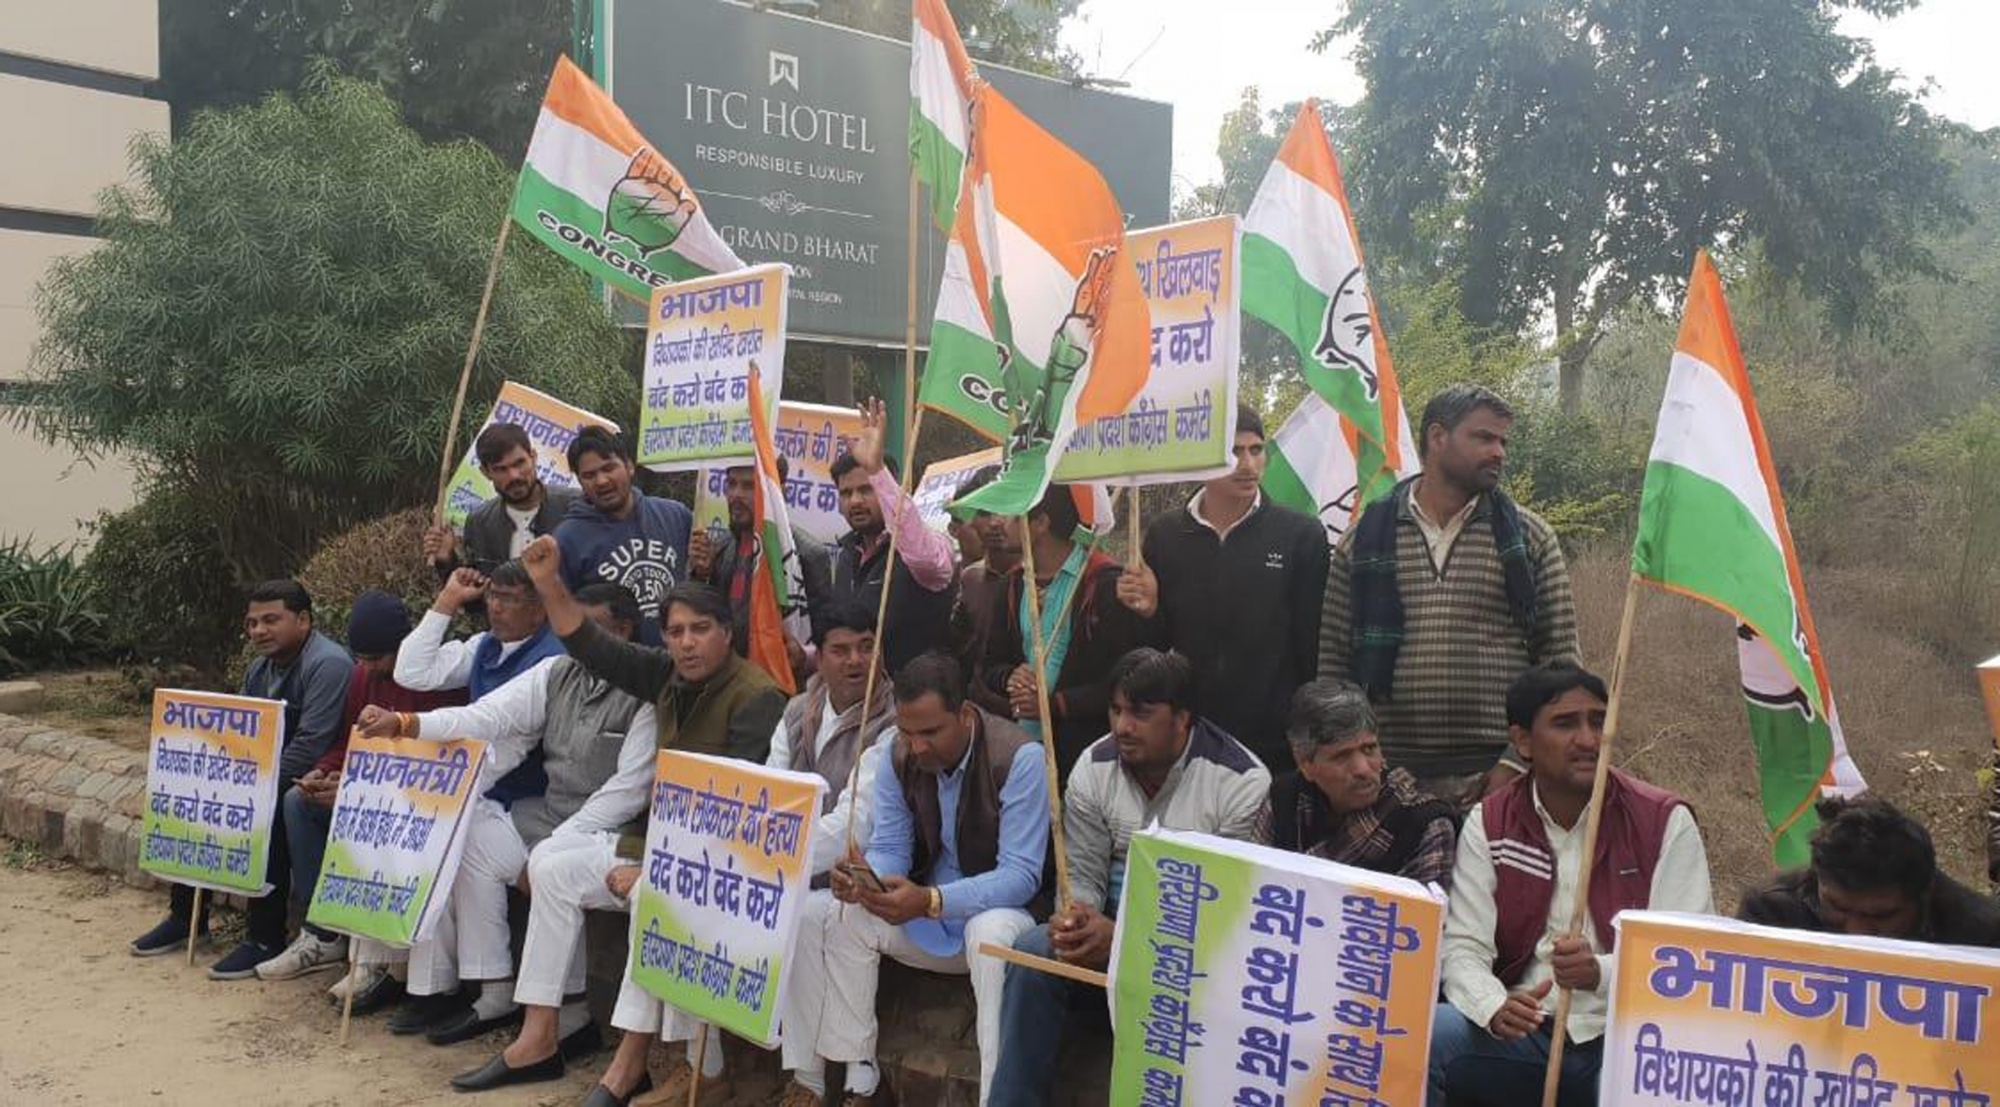 Youth Cong protesters allege BJP of disrespecting Constitution, murdering democracy